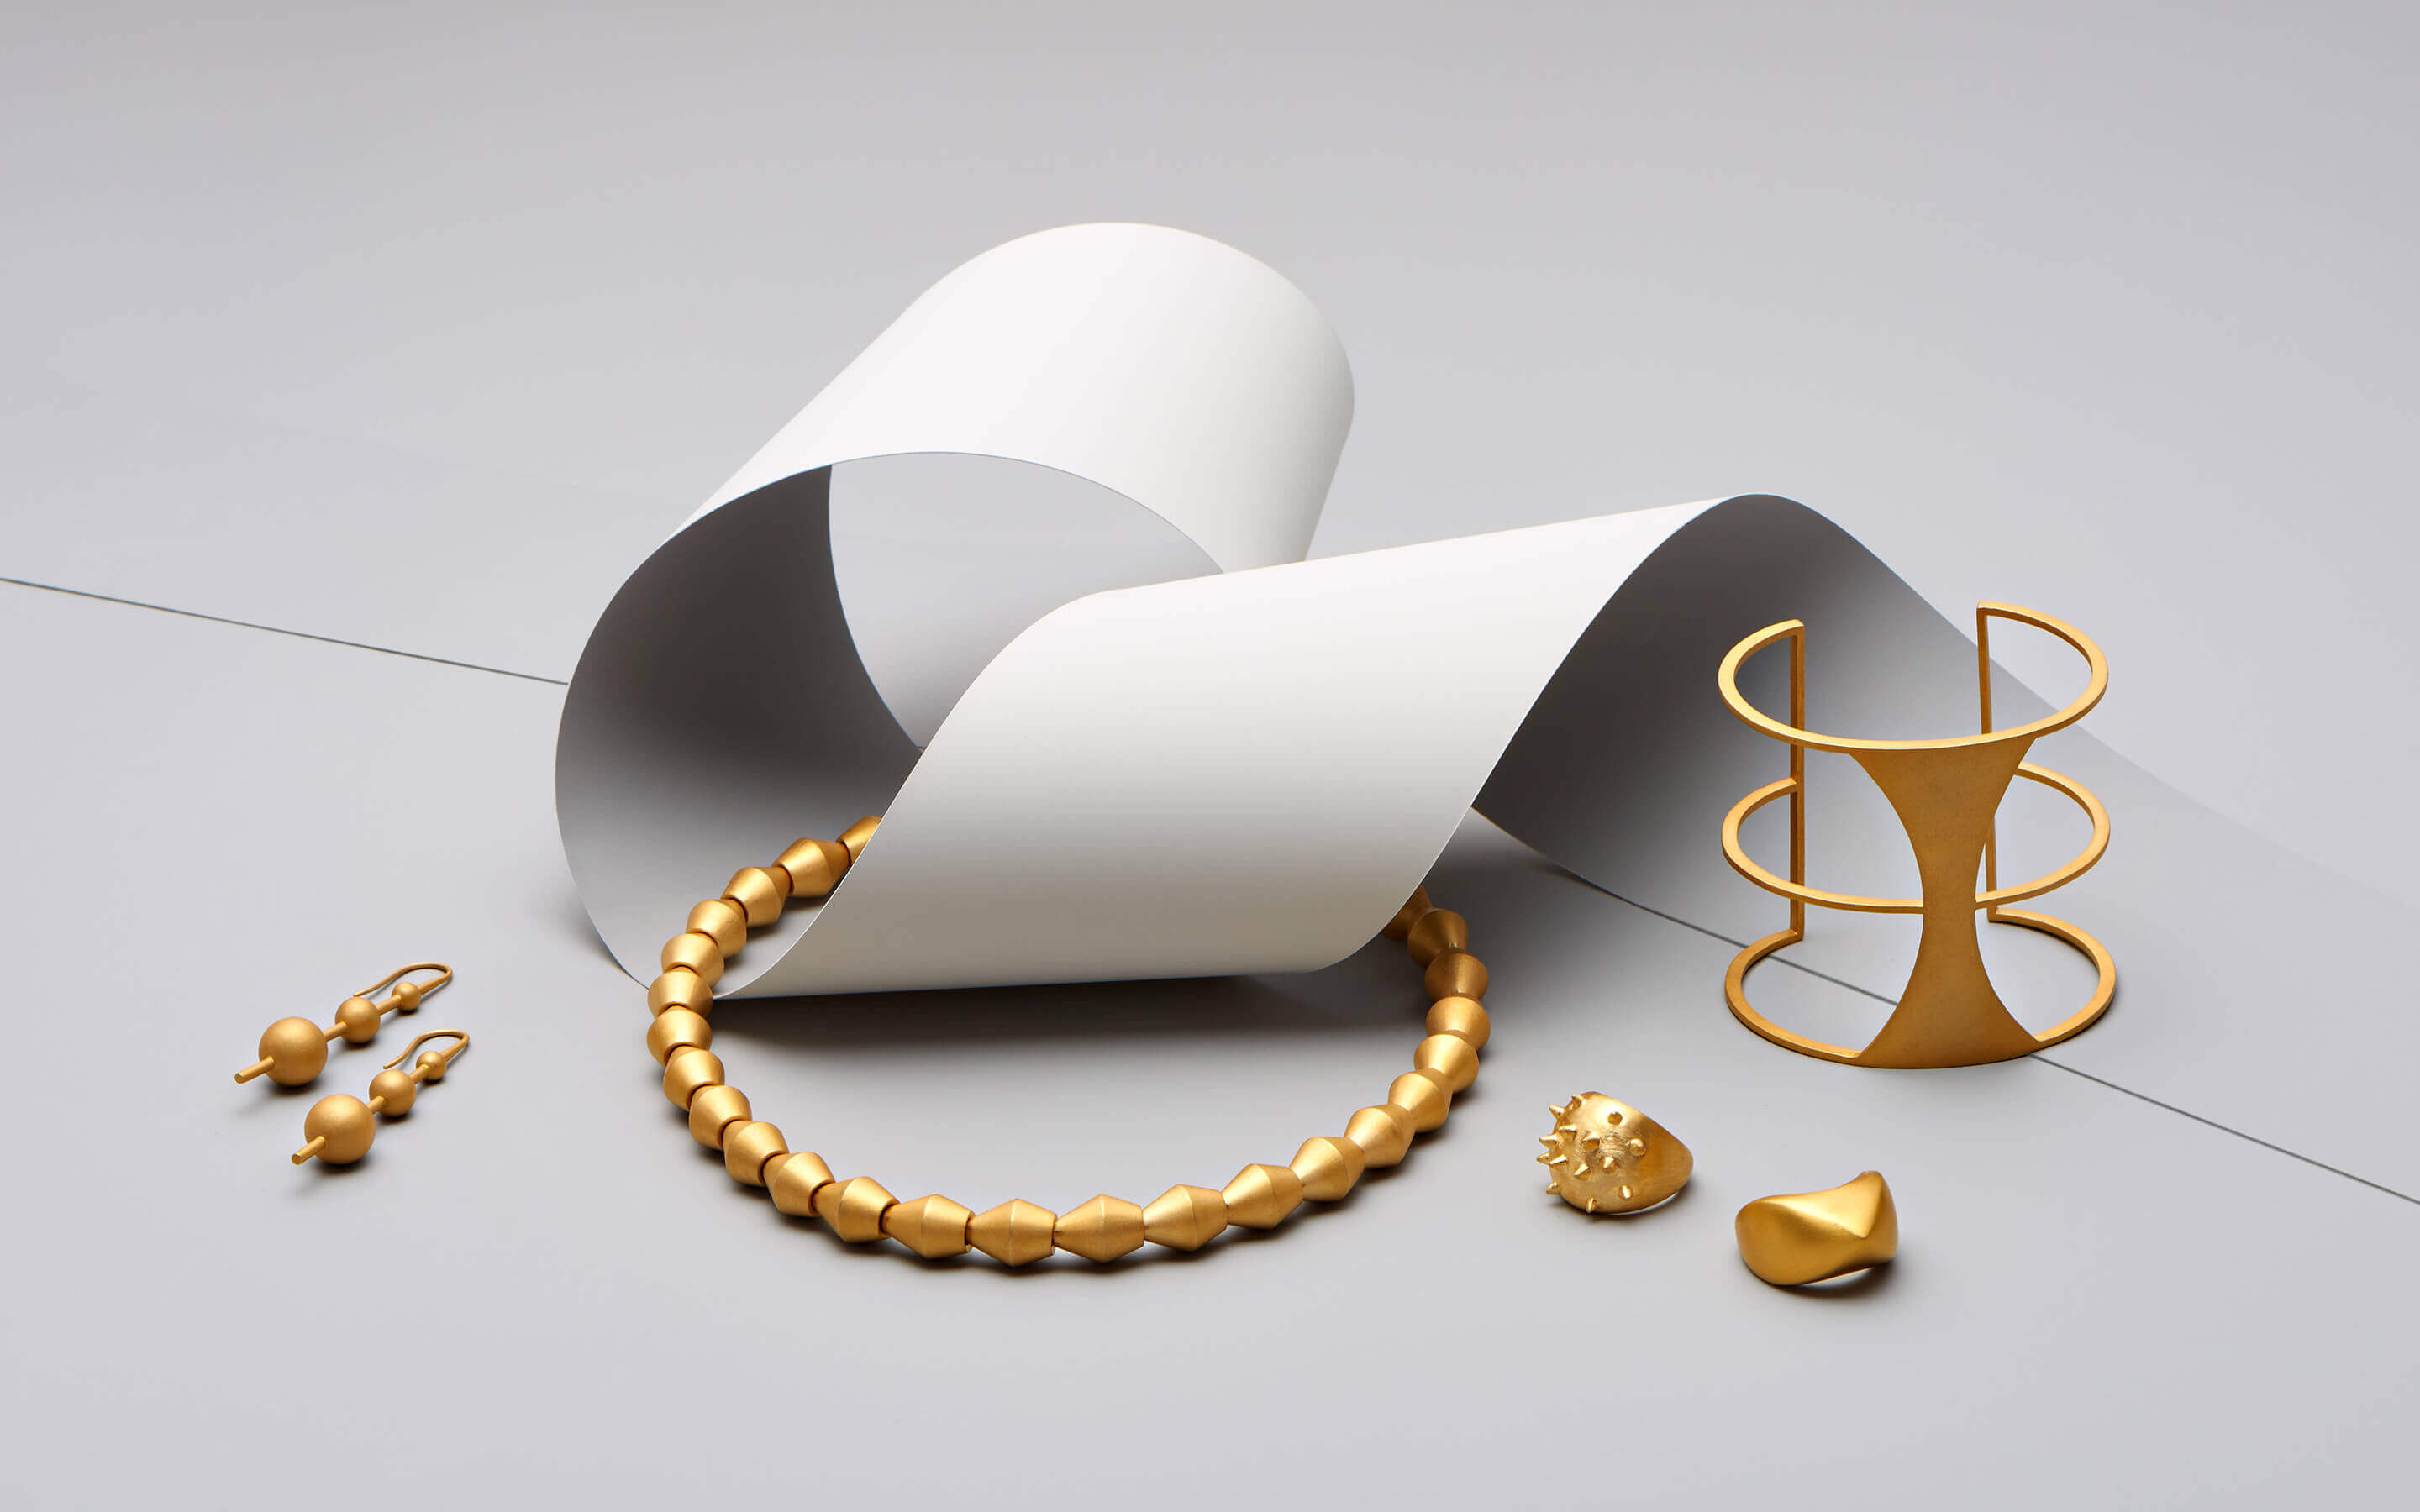 Auvere 22 and 24 karat gold jewelry from the Gold Play campaign